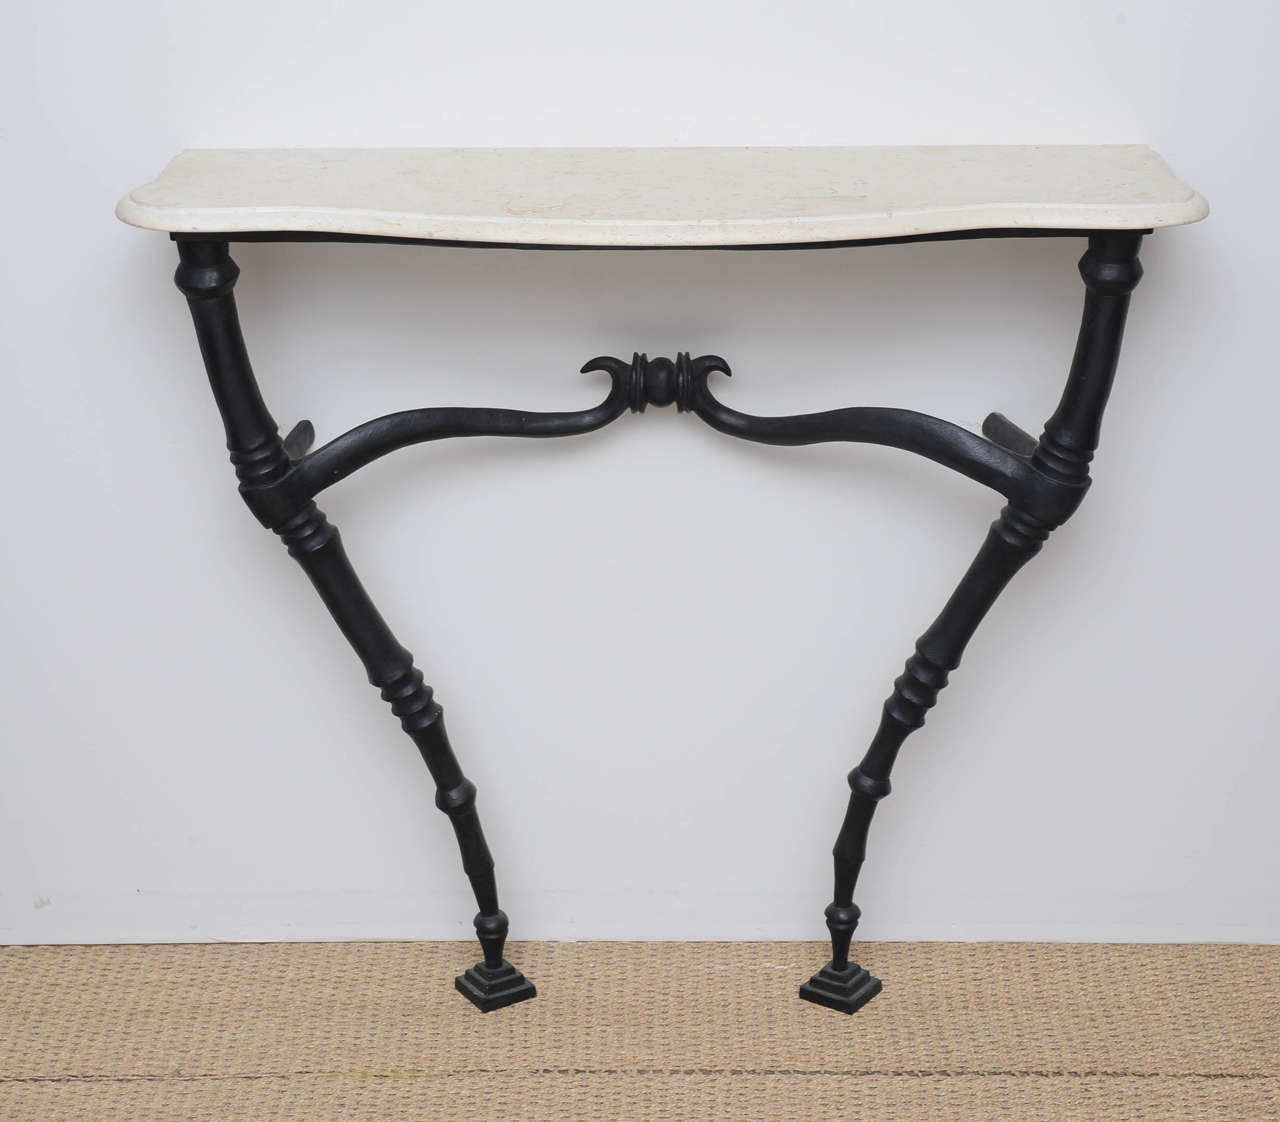 Custom Sautrelle by Manuela Zervudachi. Bronze base and marble top-exquisite sculptural console. Signed series one of six, 2006.